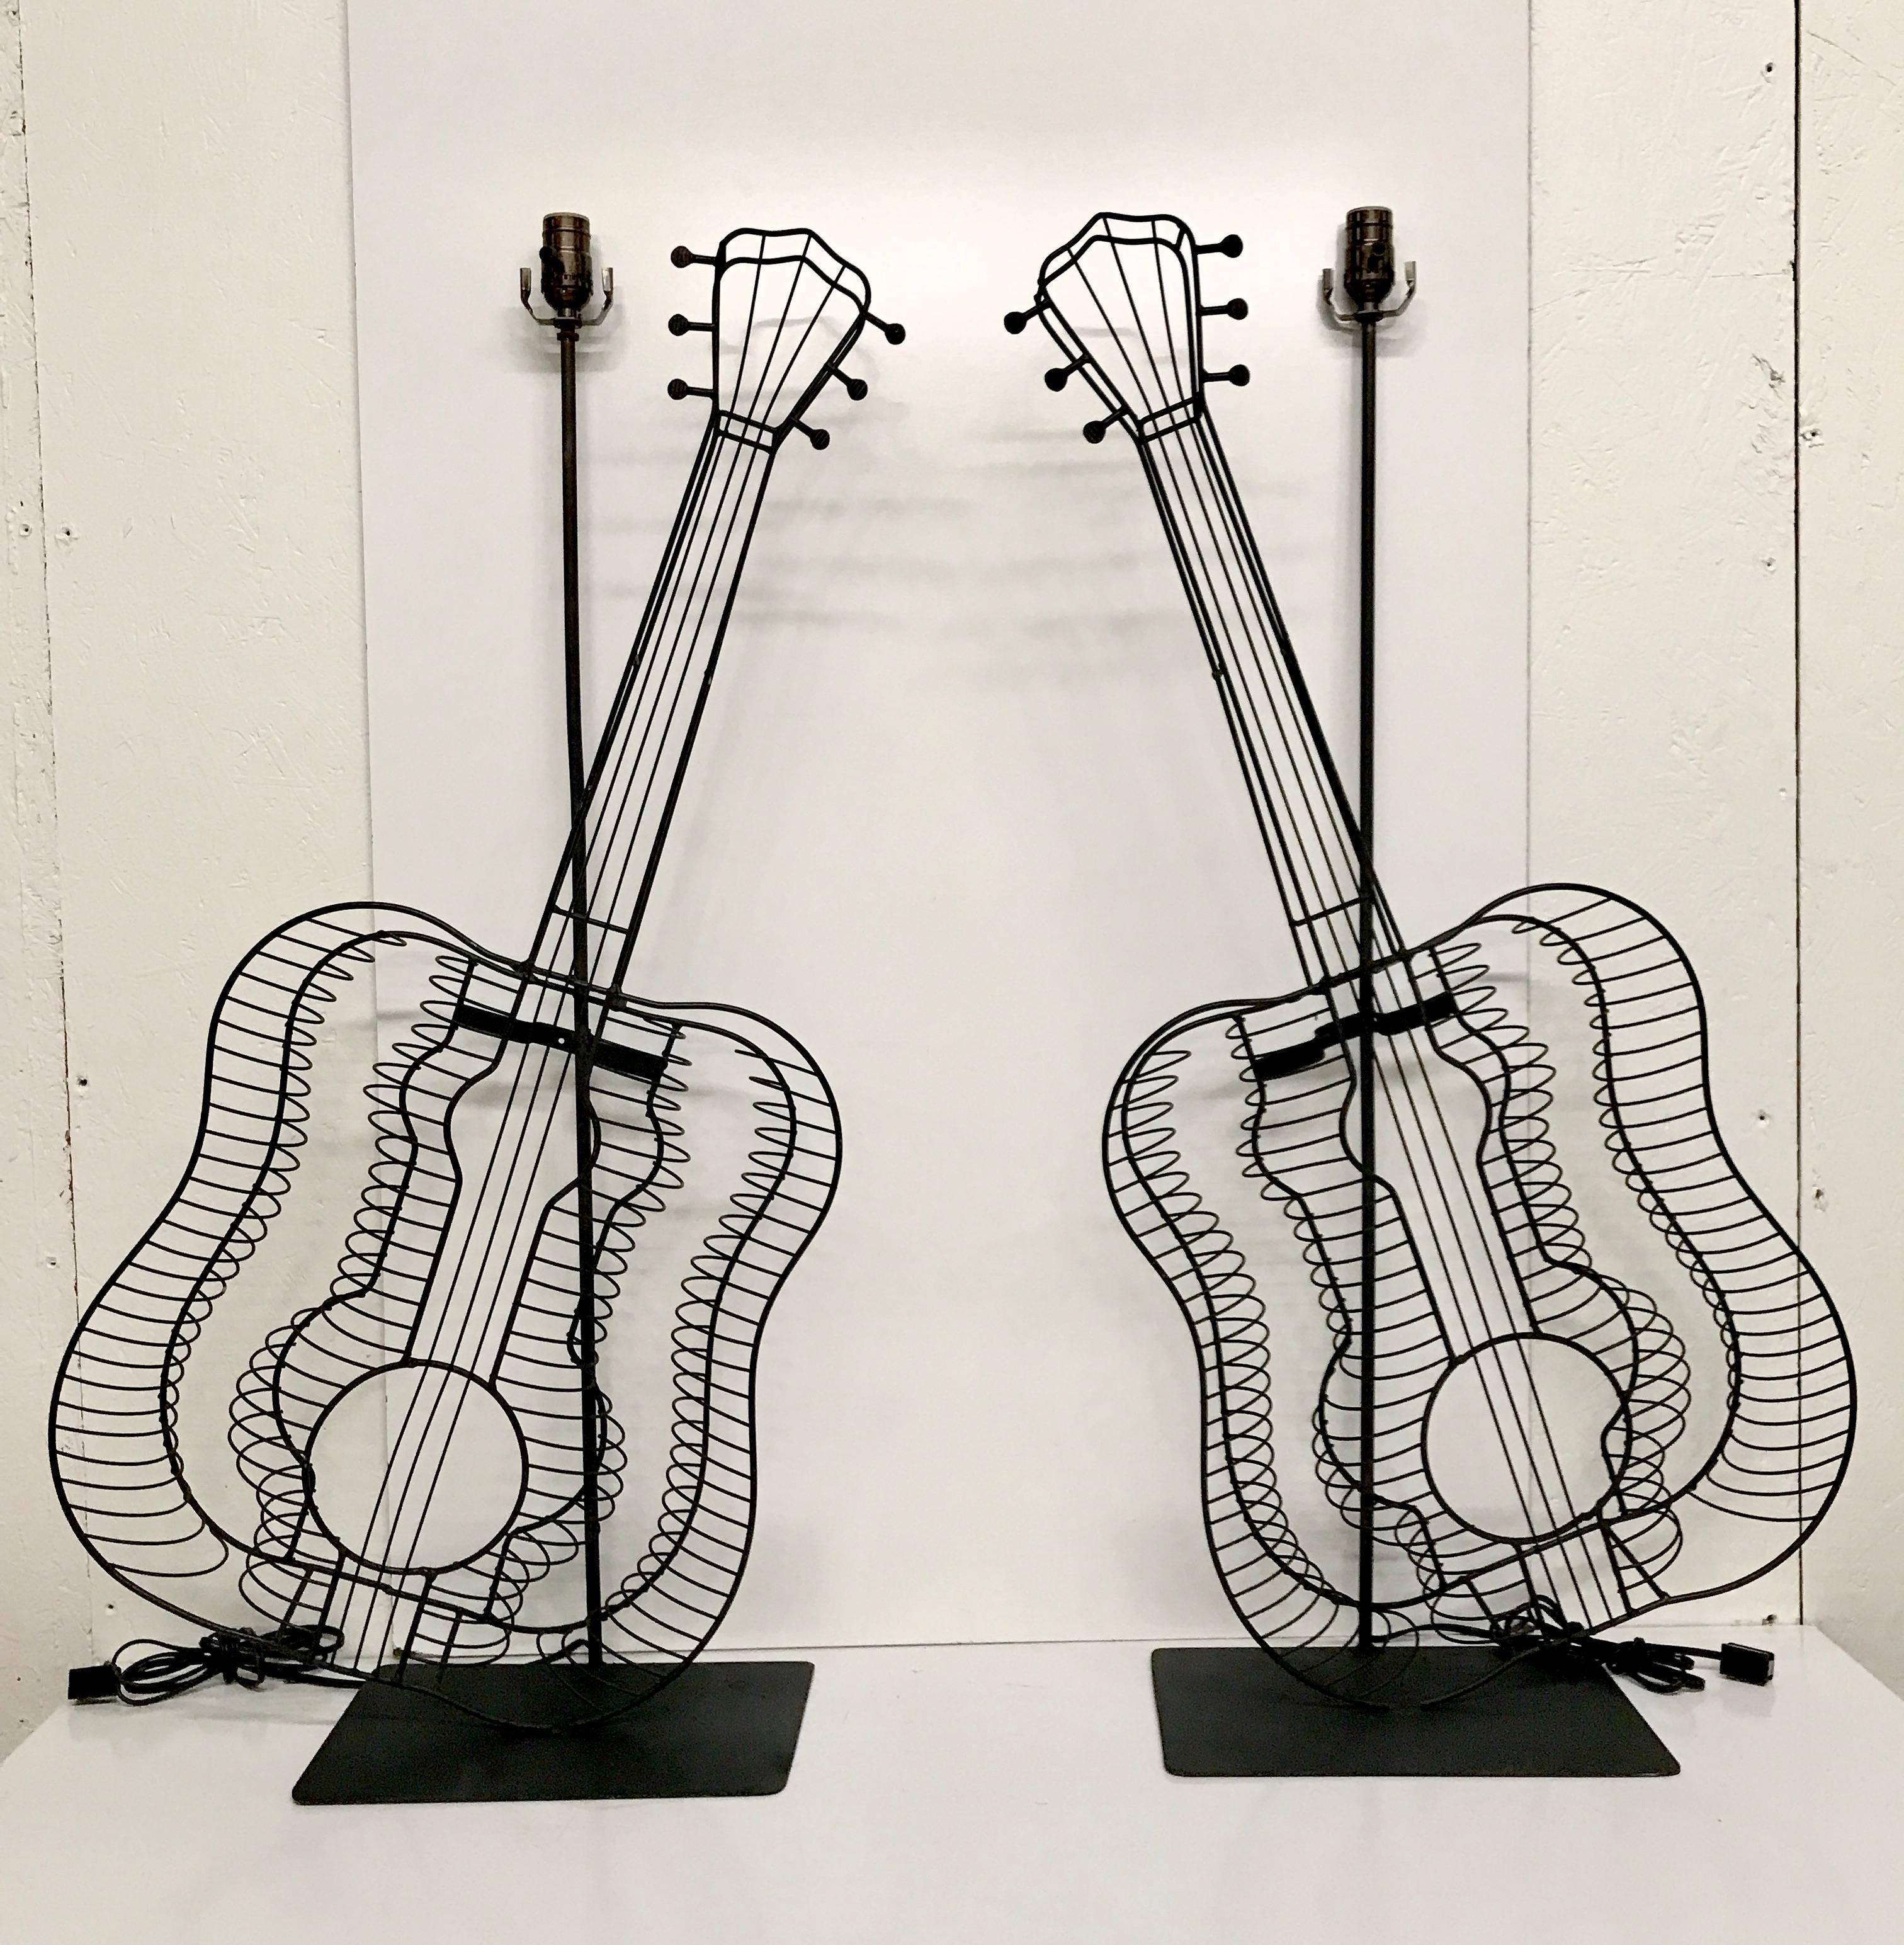 A pair of Fredrick Weinberg style guitar lamps, one facing right the other facing left. The actual sculptures measure 38 inches high x 4 inches deep.